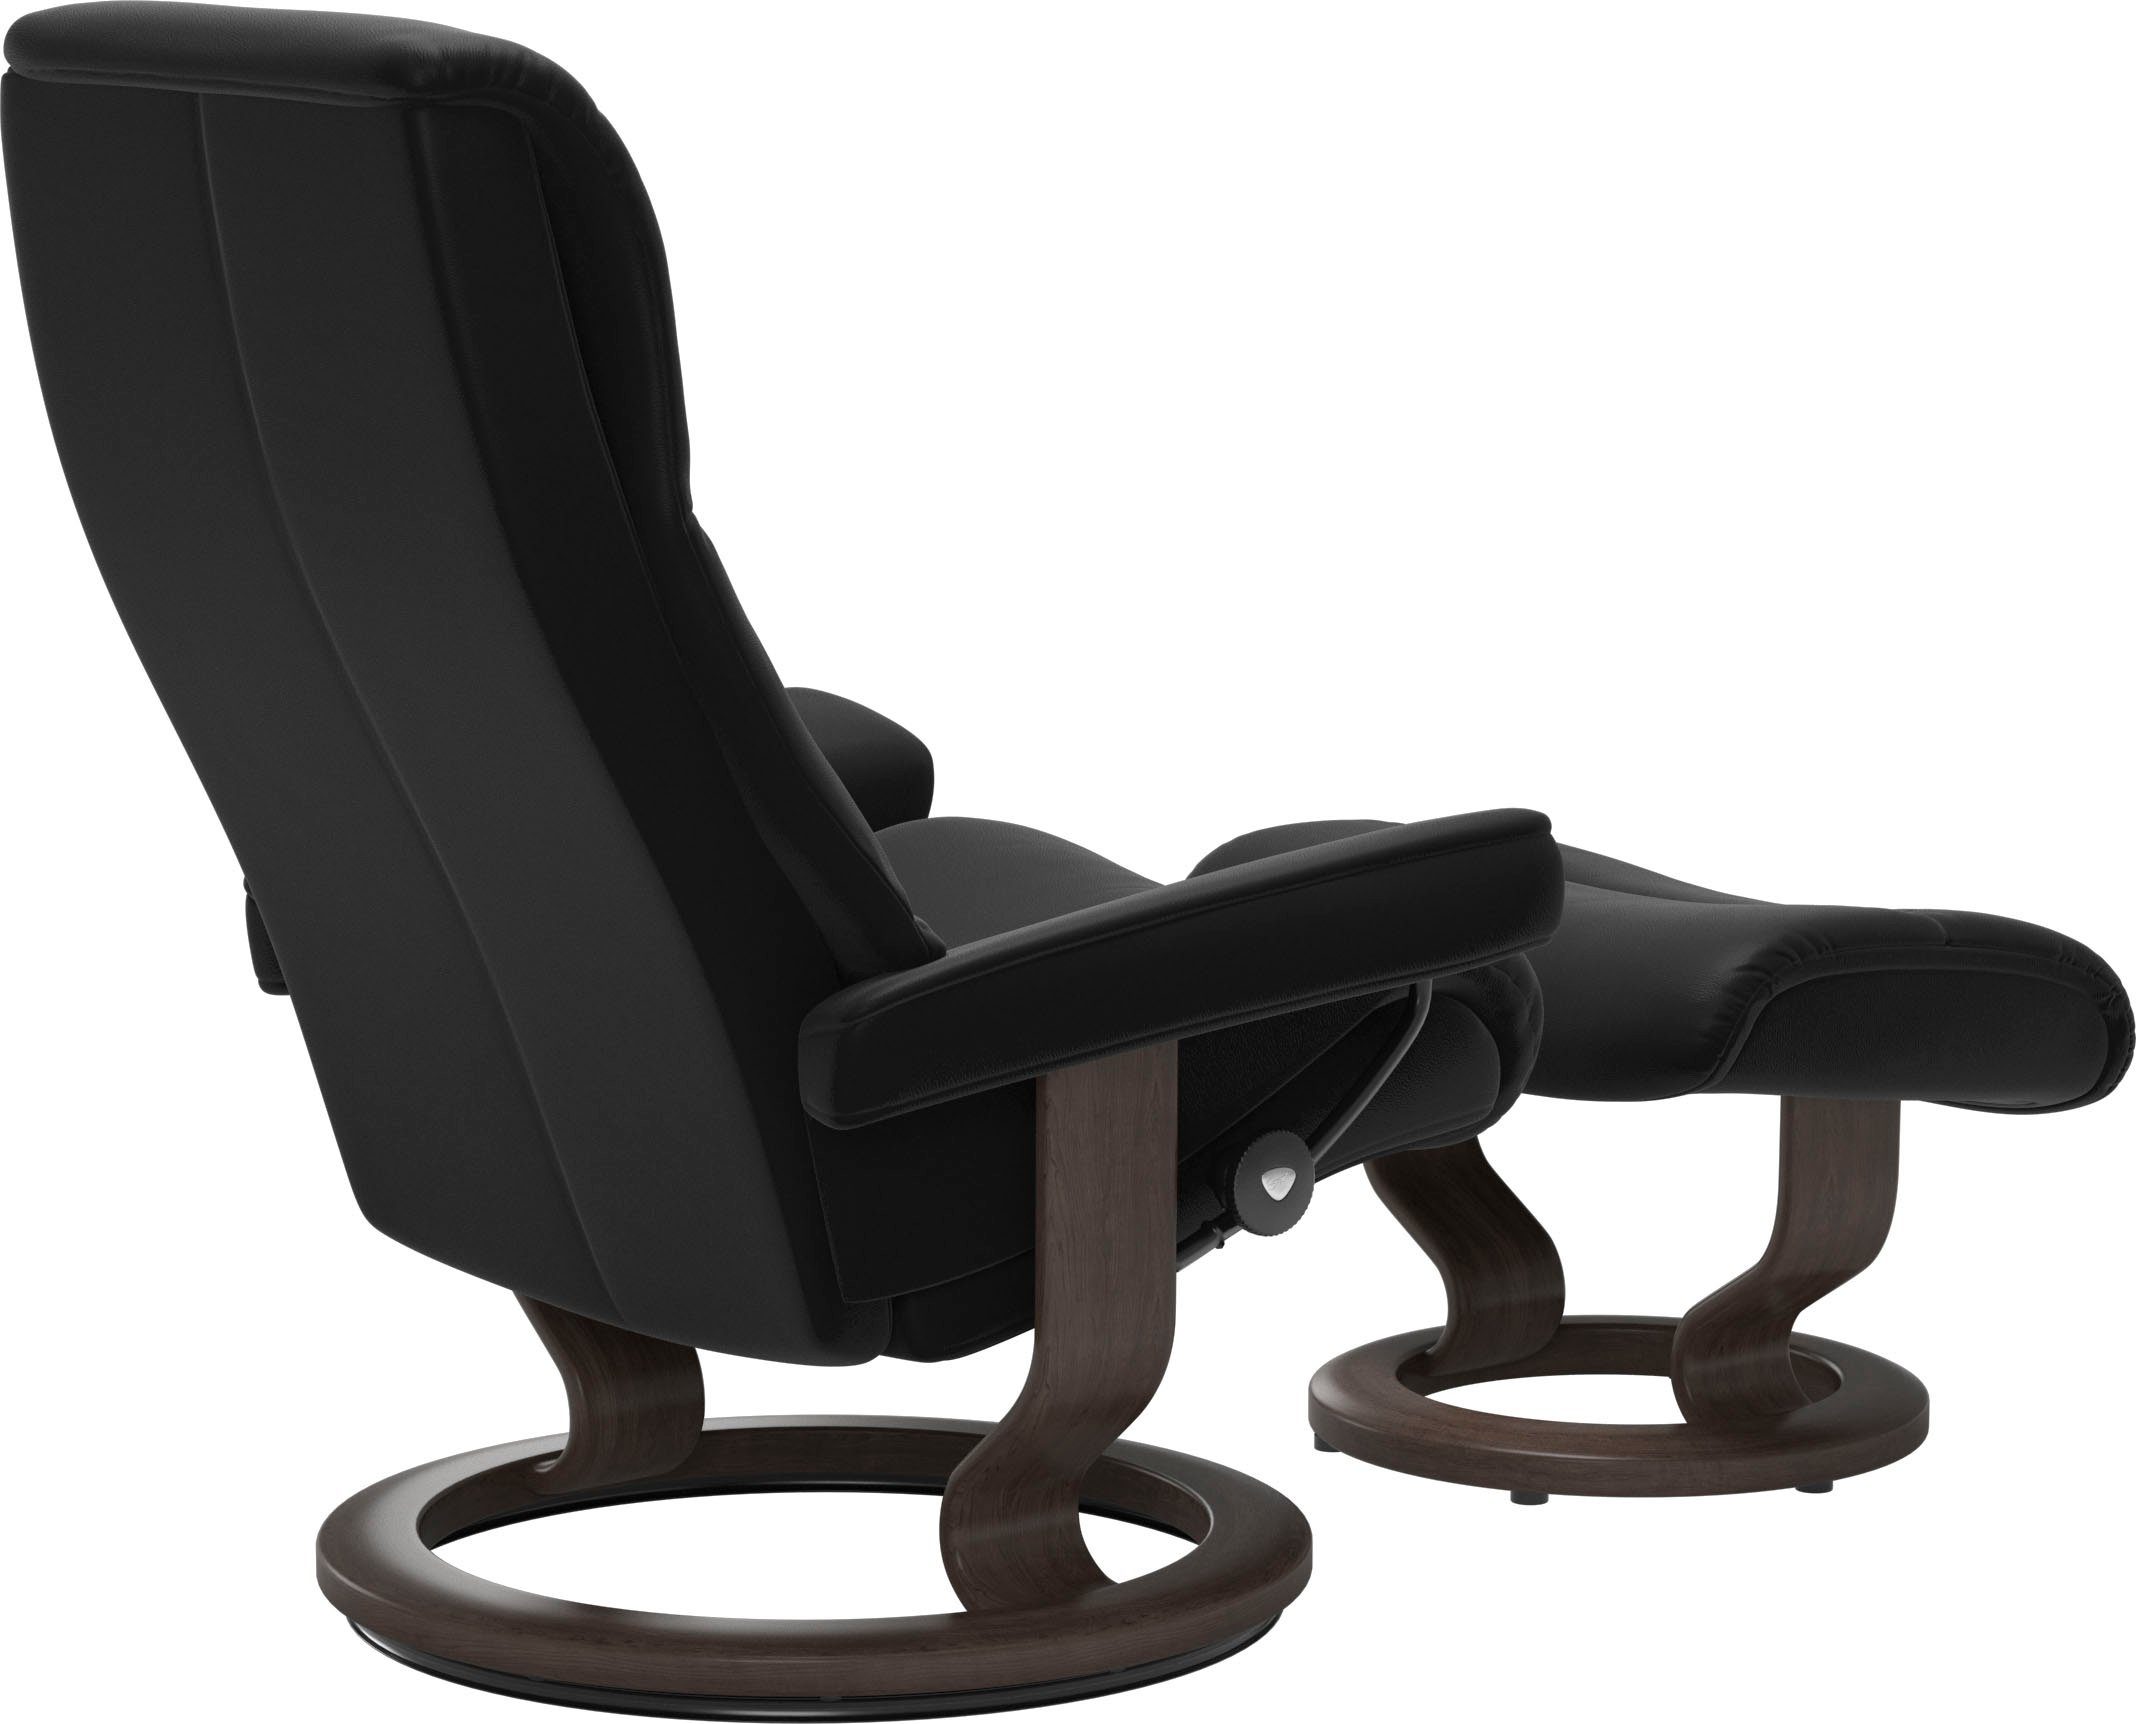 Classic Relaxsessel mit Größe M,Gestell View, Wenge Stressless® Base,